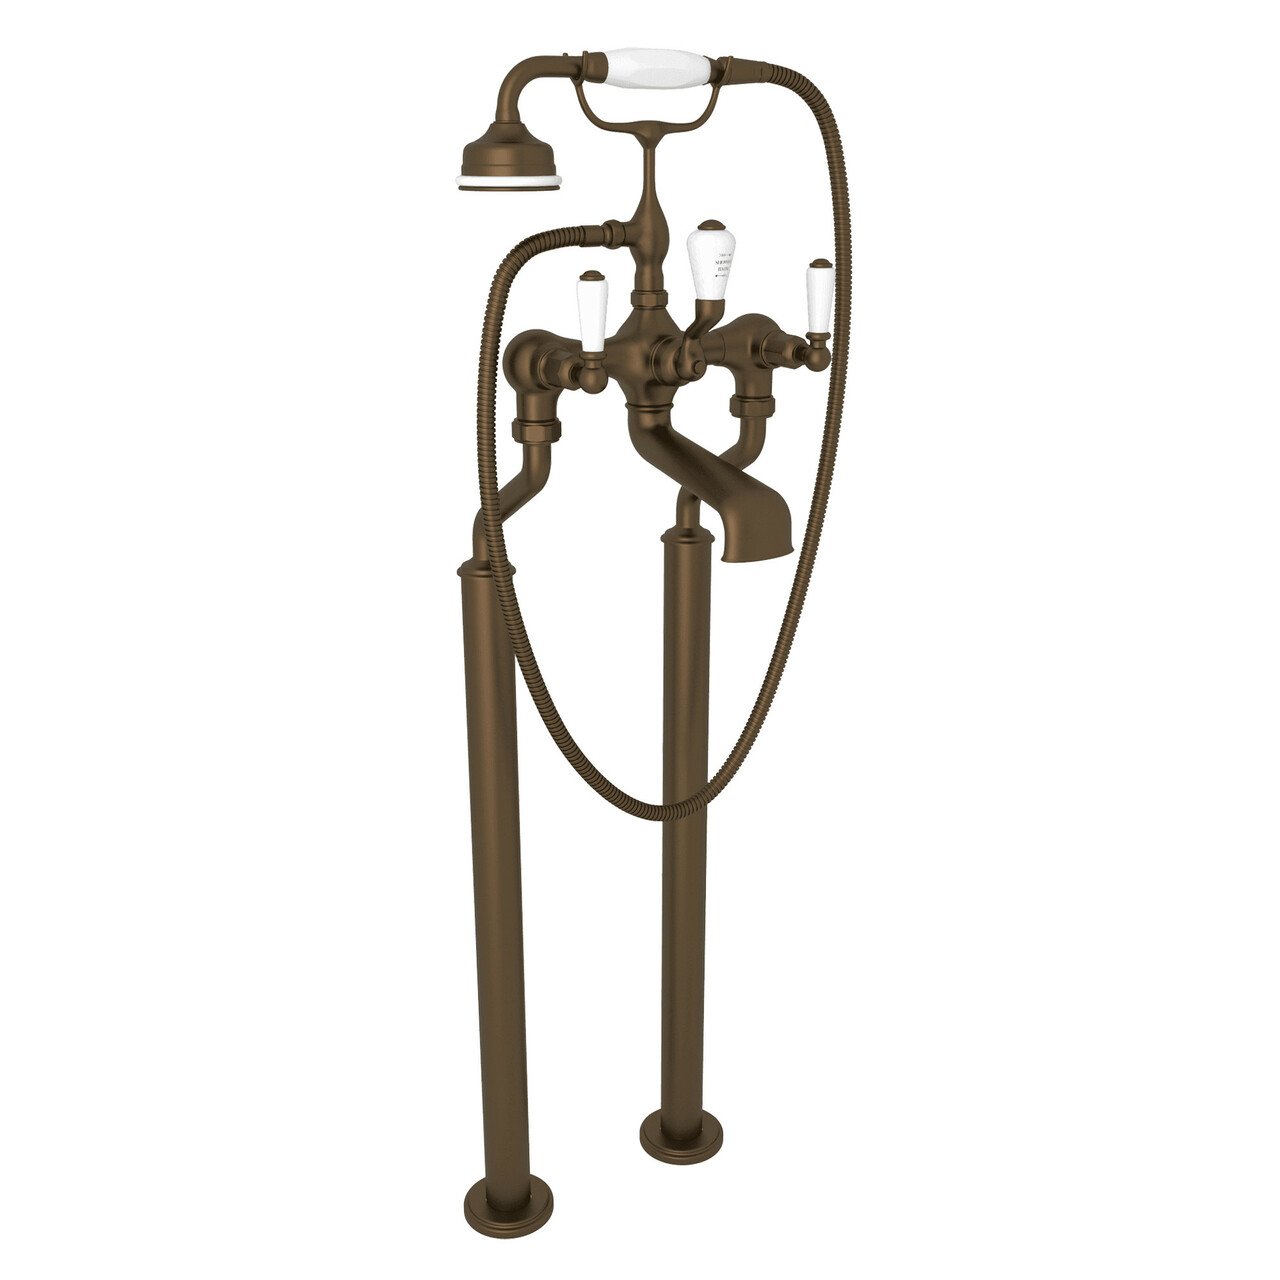 Perrin & Rowe Edwardian Exposed Floor Mount Tub Filler with Handshower - BNGBath